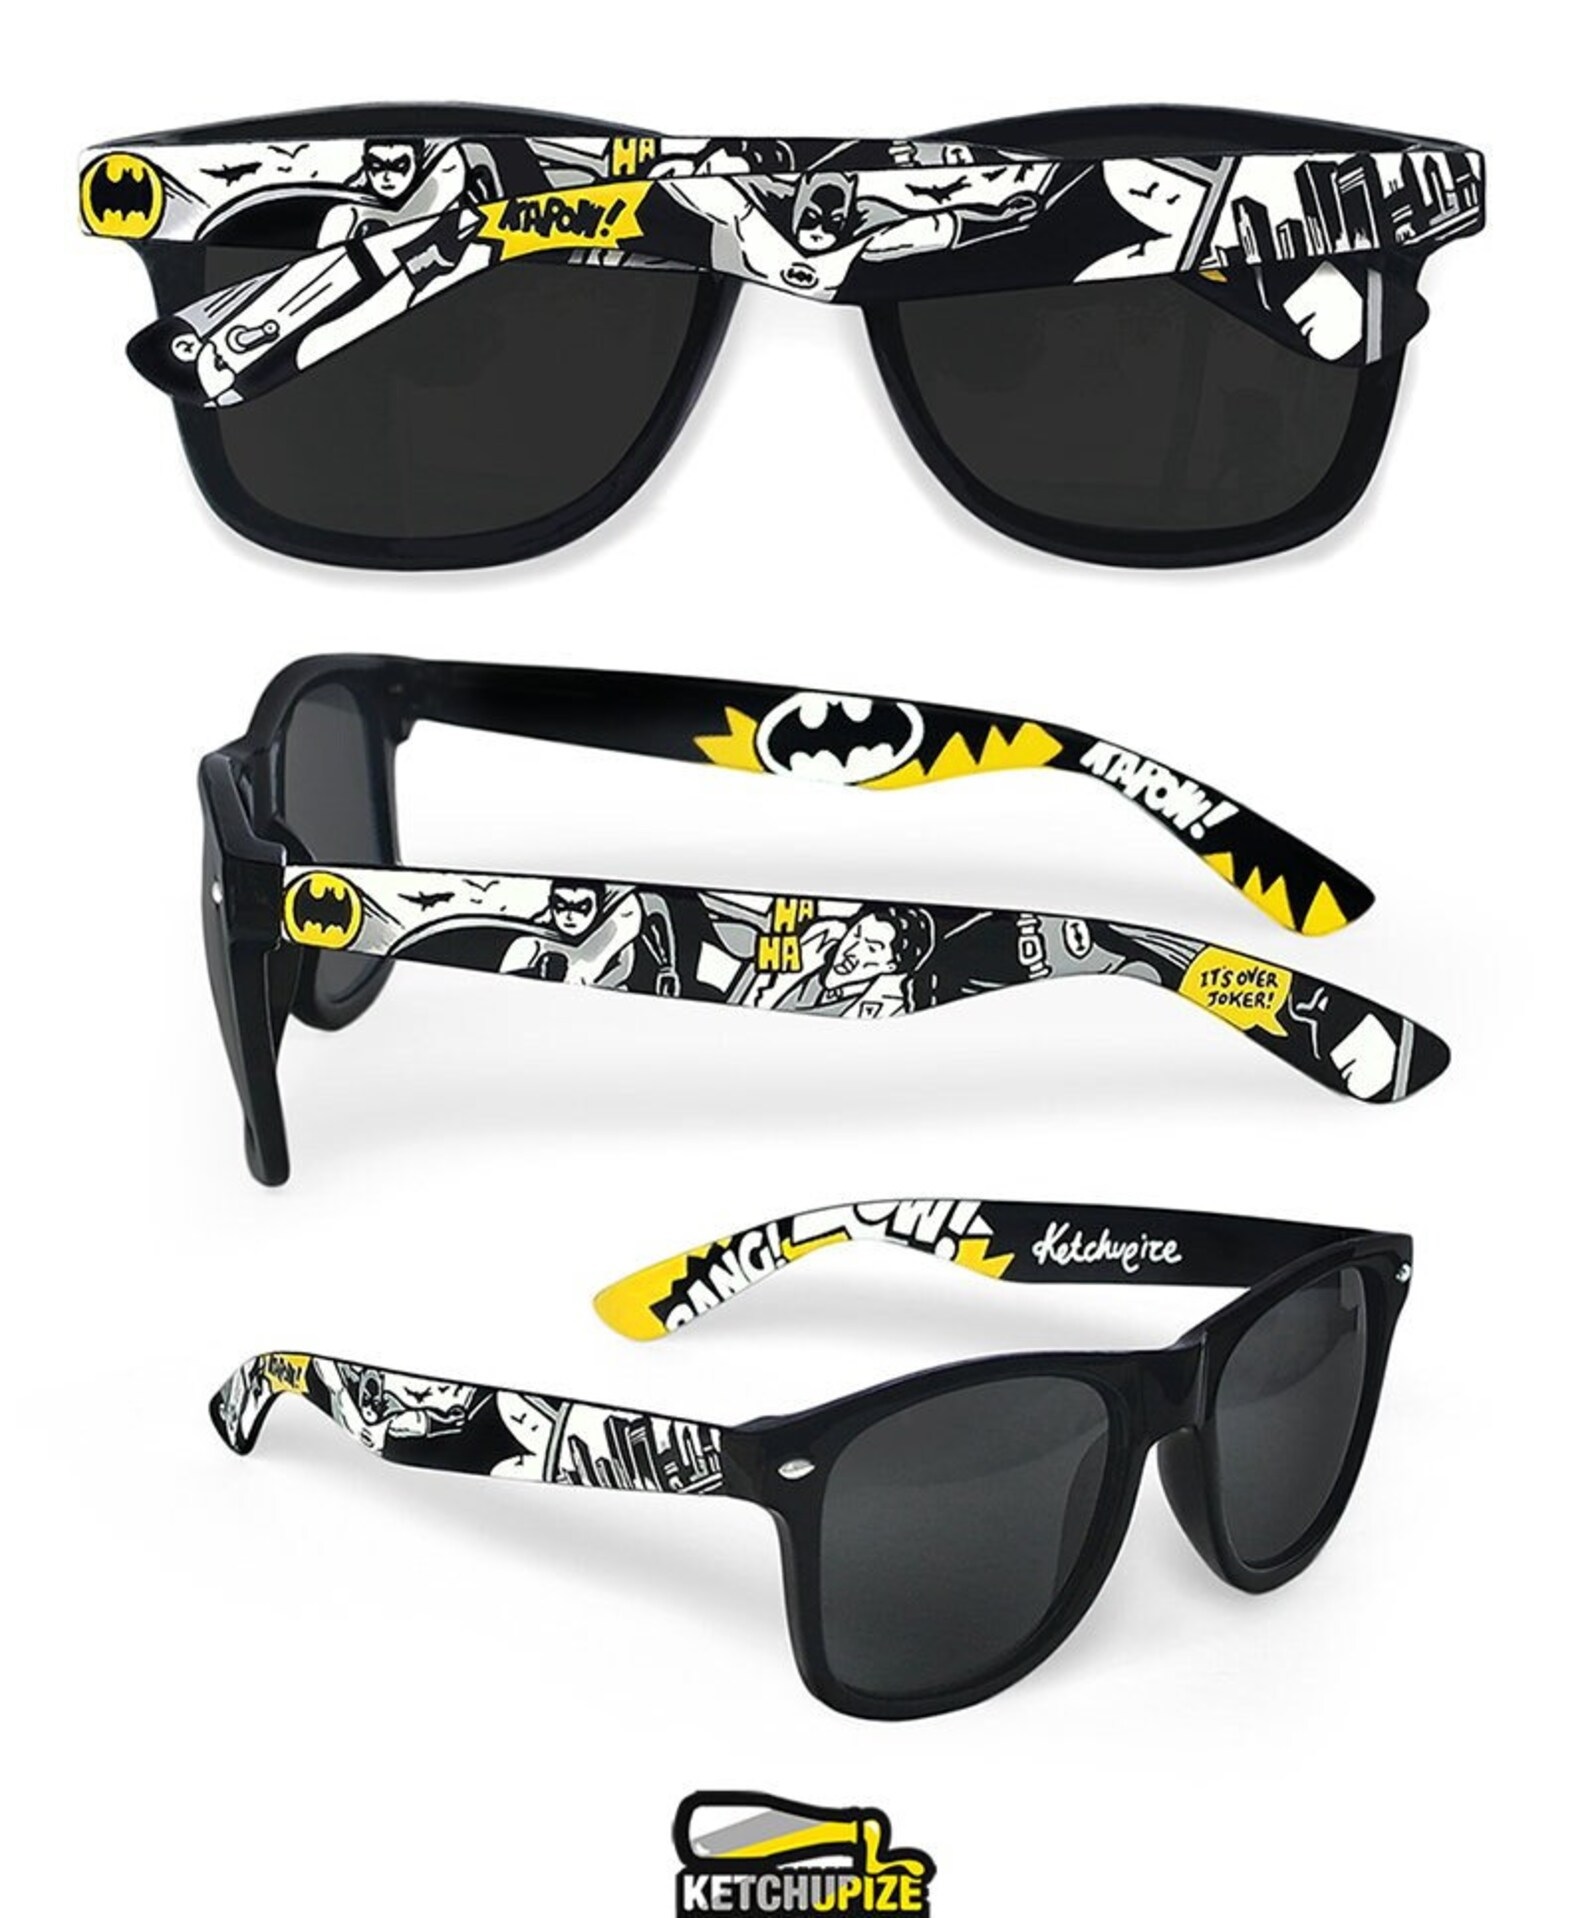 A pair of sunglasses with Batman and Robin fighting the Joker on the temples